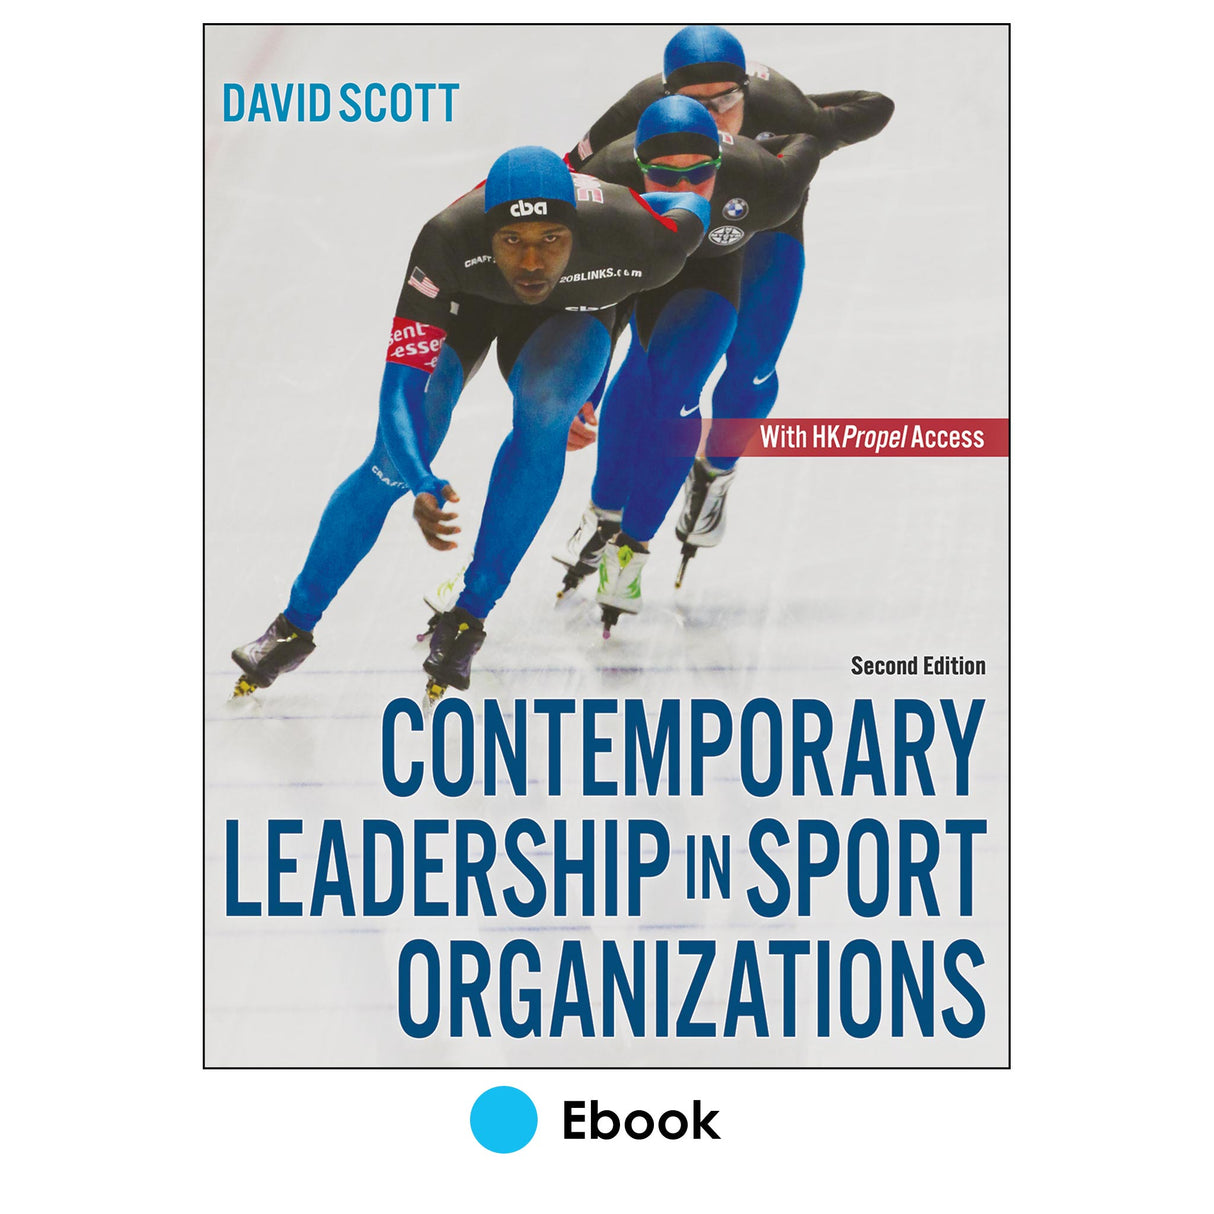 Contemporary Leadership in Sport Organizations 2nd Edition Ebook With HKPropel Access